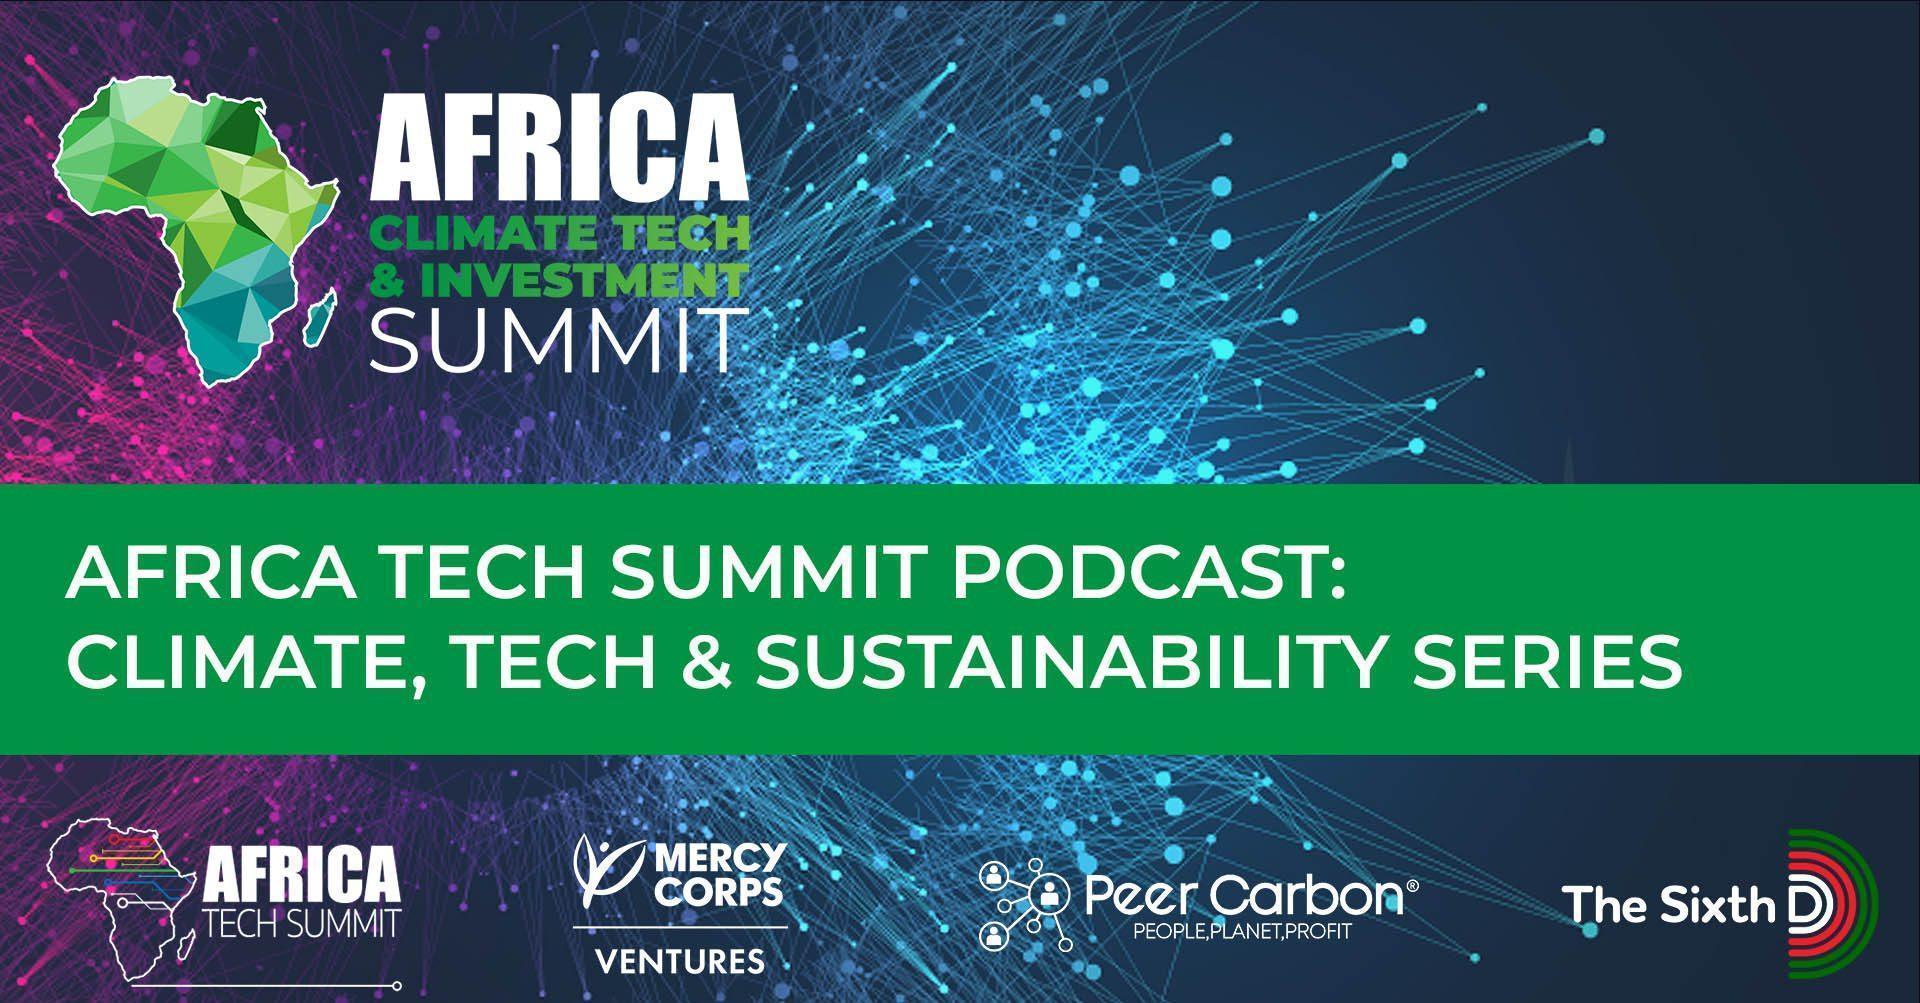 The Climate Tech Changemakers Driving Positive Growth and Resilience Across Africa